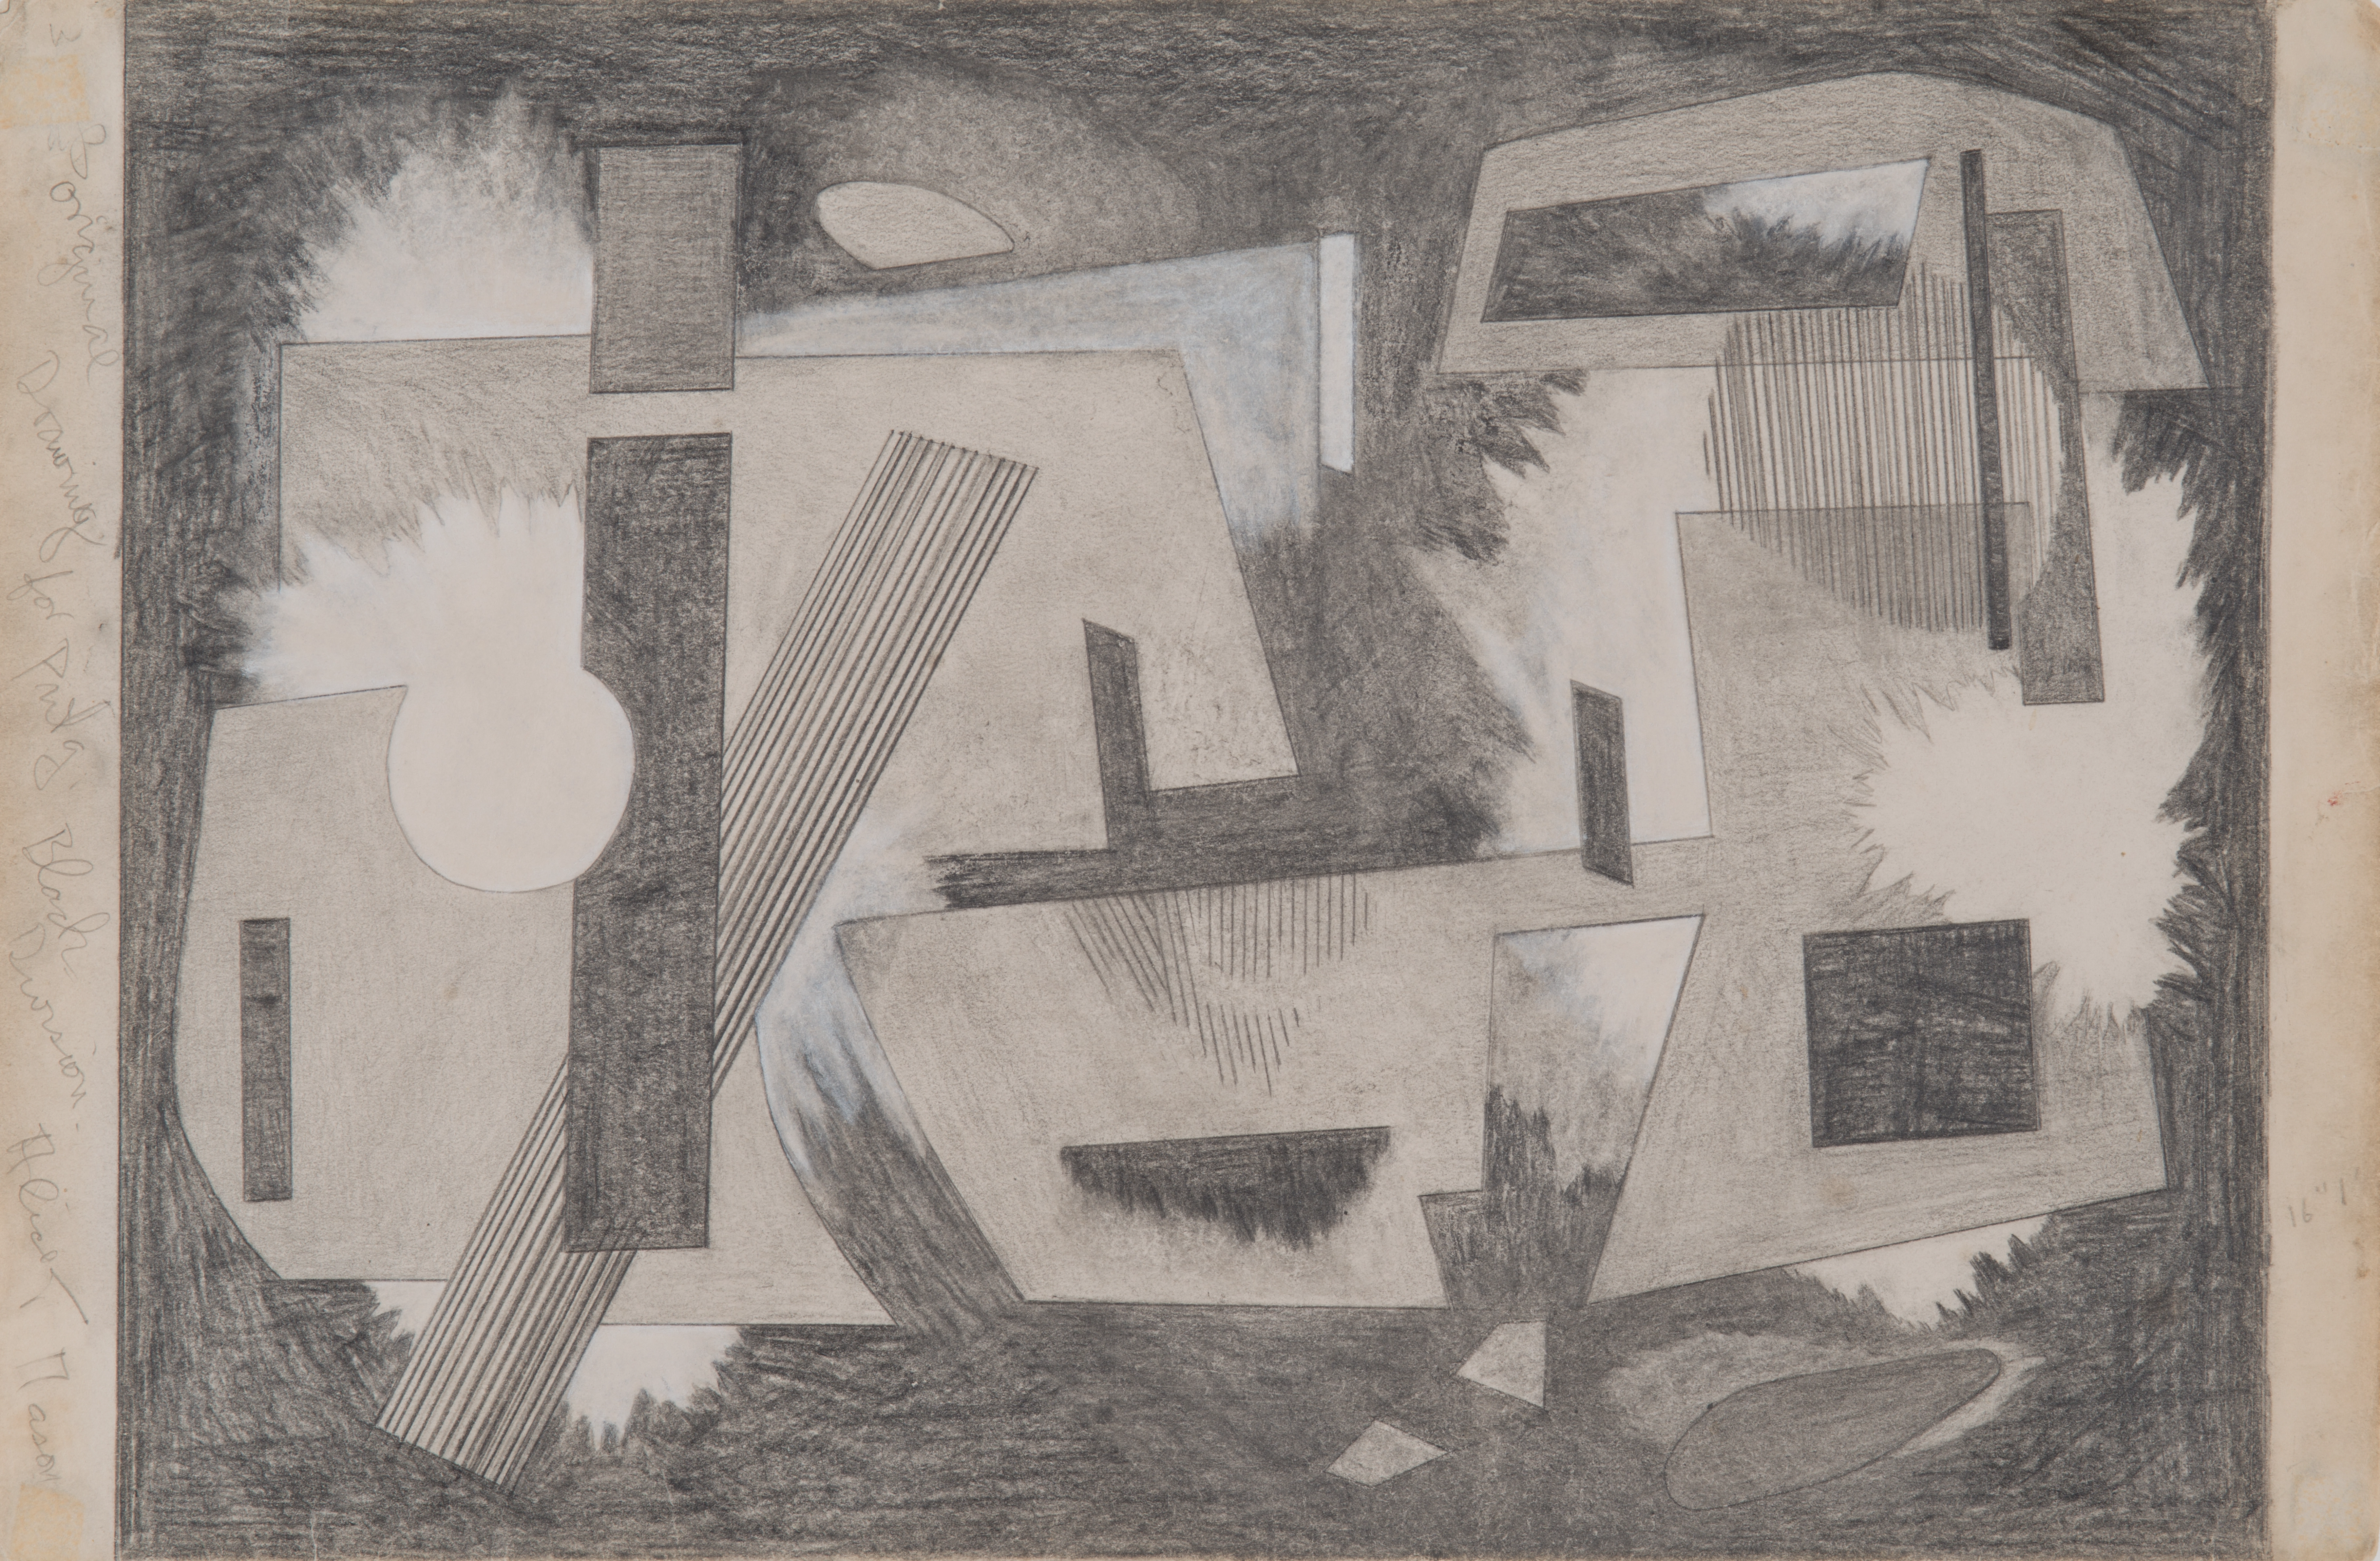 Abstract pencil drawing of linear forms, shaded with varying tones of grey. Areas of the composition are punctuated with burst-like white forms.